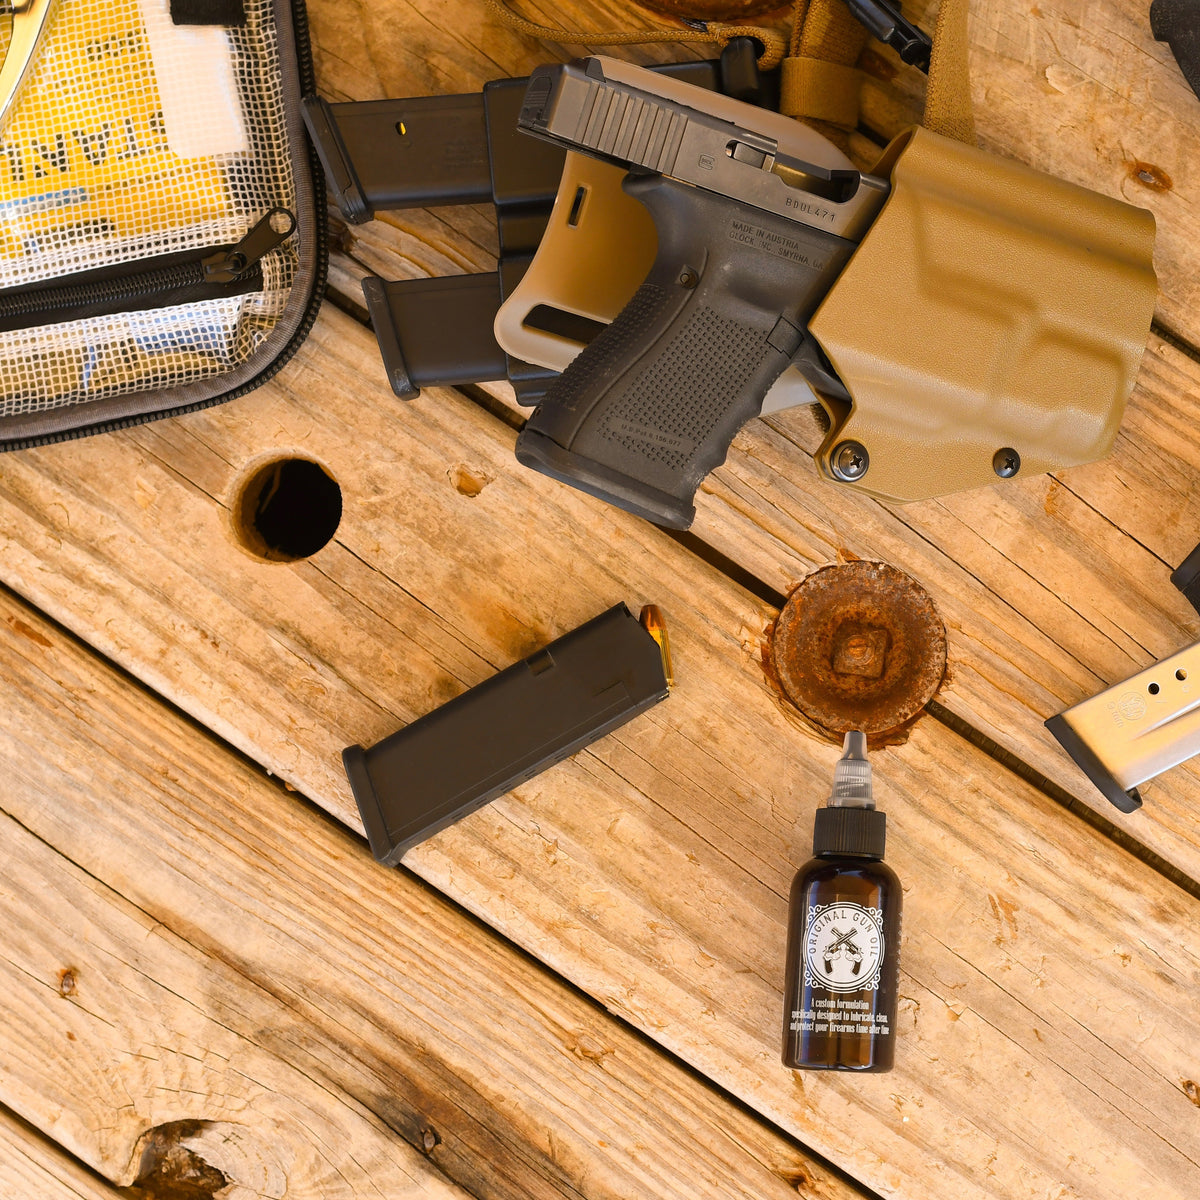 Bottle of Original Gun Oil with Every Day Carry Holster and Hand Gun